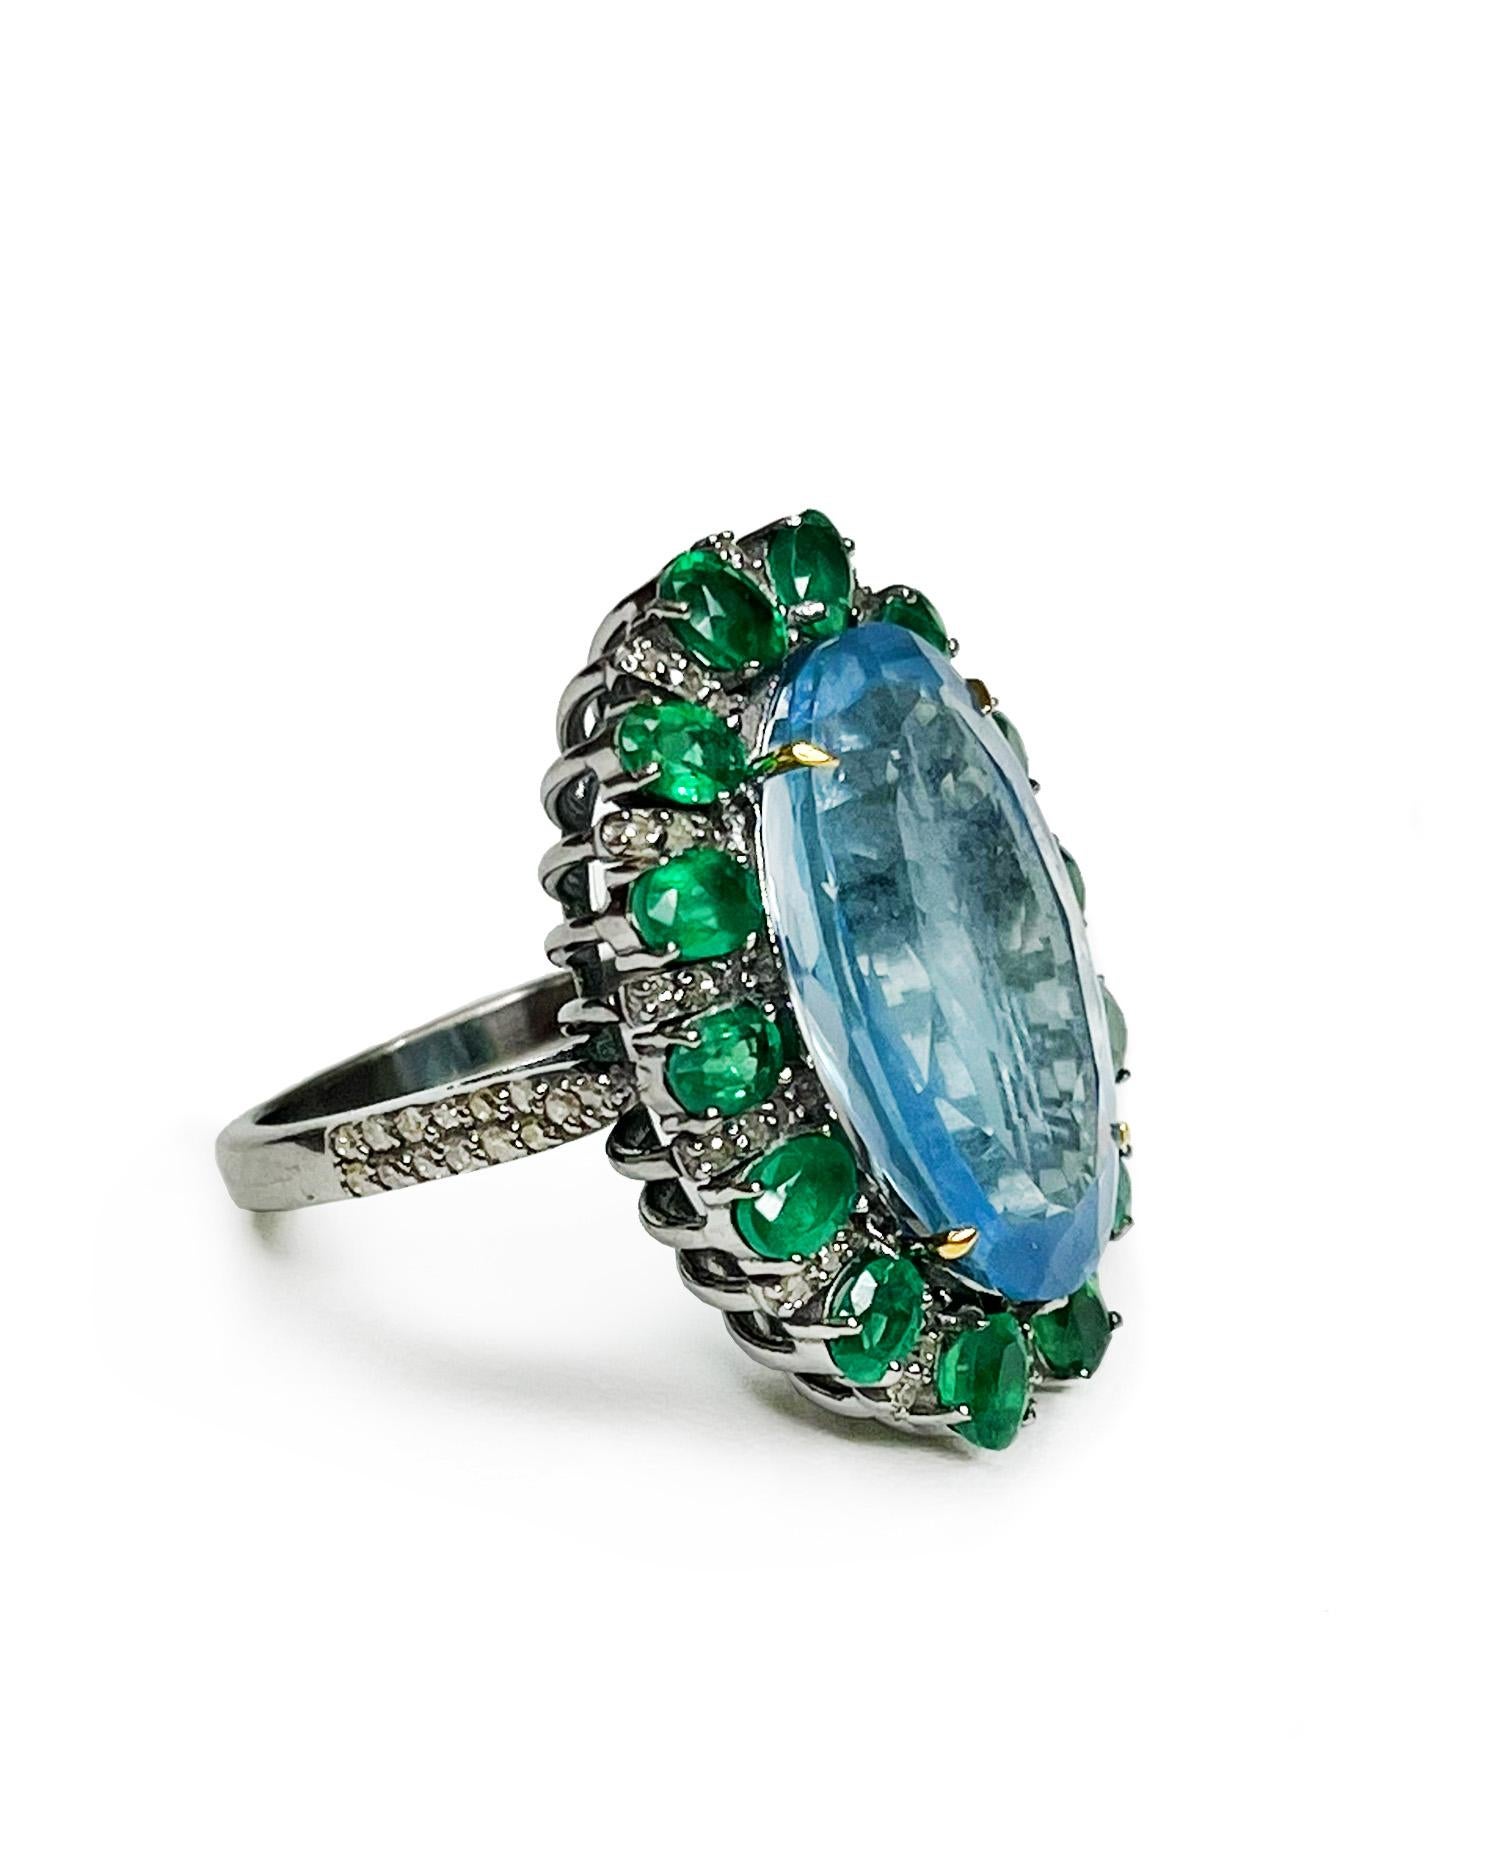 Intention: Showstopper

Dorian's Find: The Majesty Ring is the ultimate way to rejuvenate your jewelry collection for a fresh season. Stunning aquamarine is the birthstone for March and makes us think of clear days spent outside under blue skies.